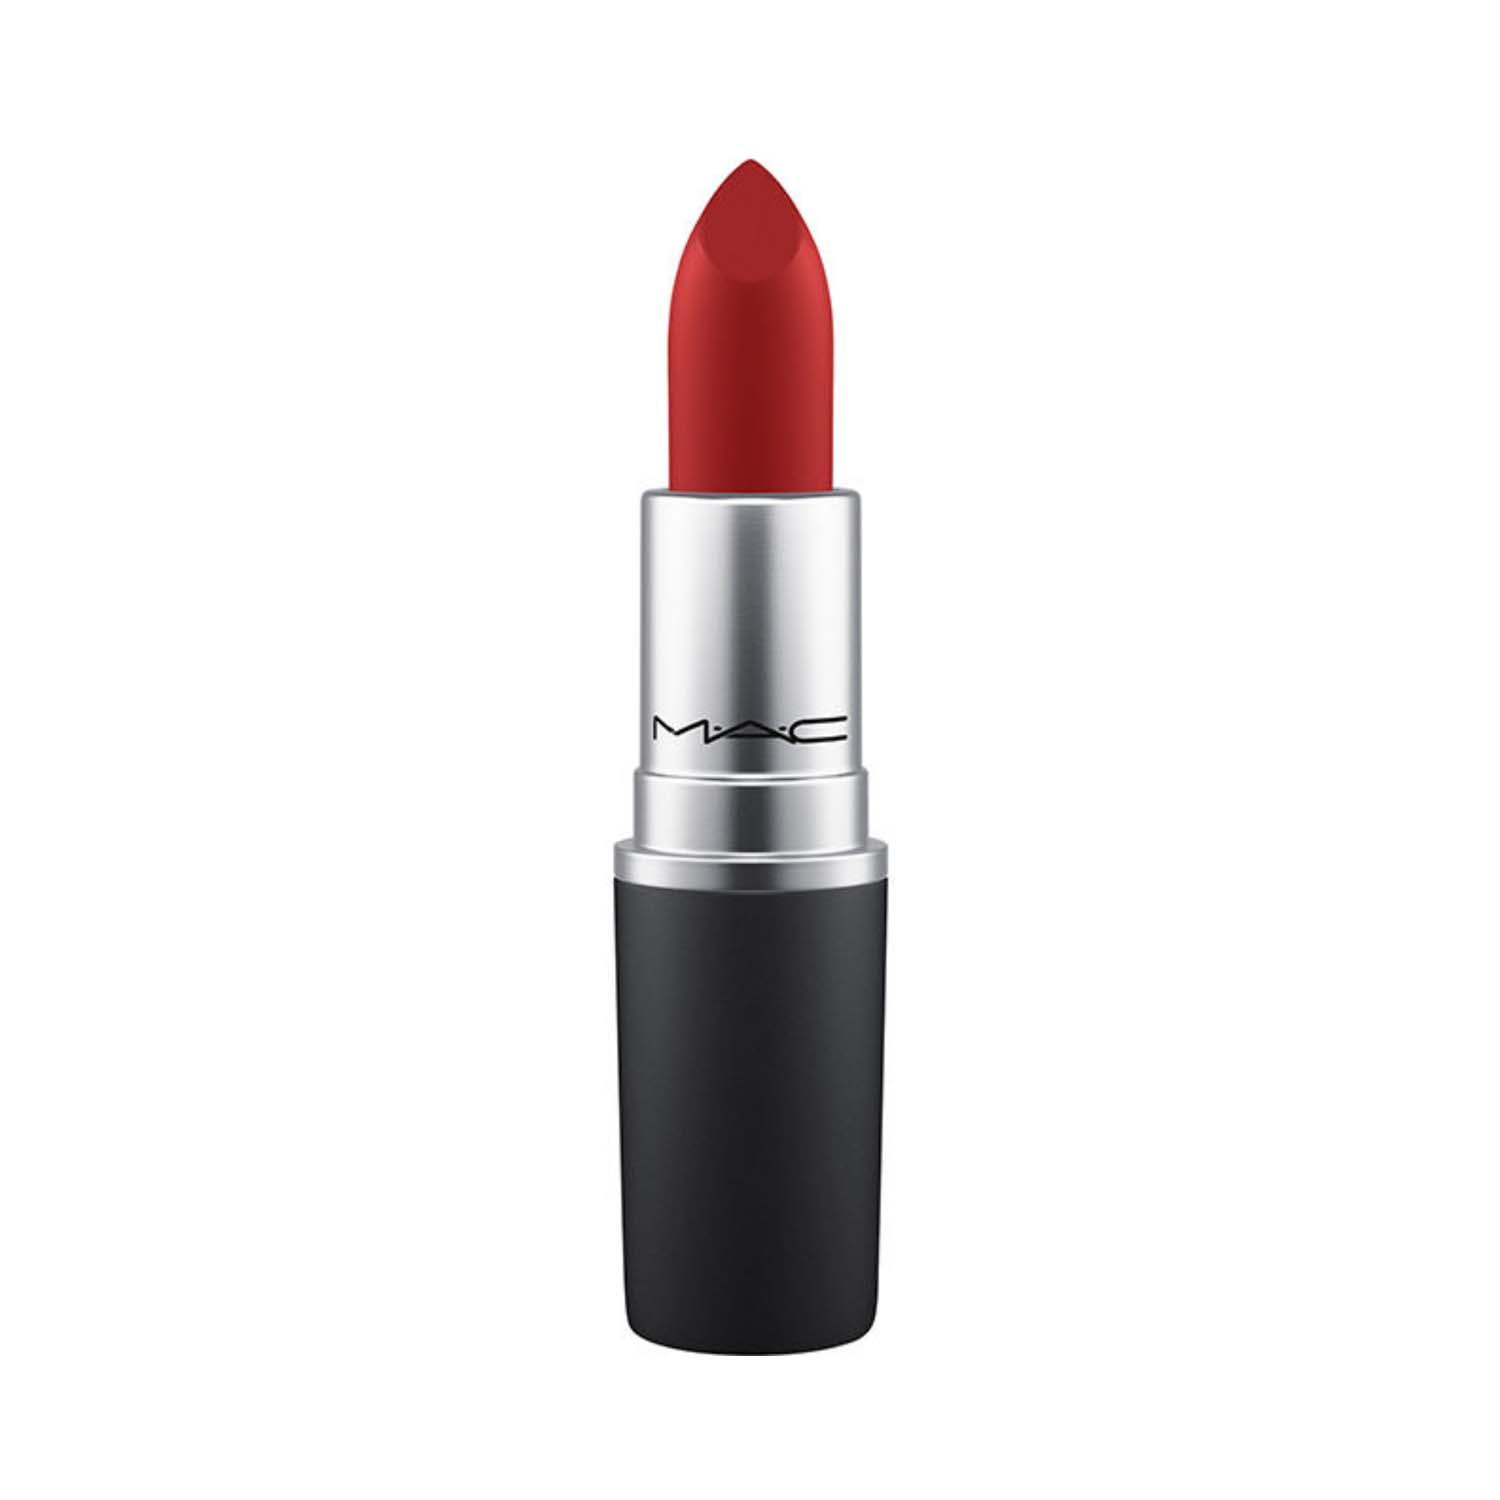 M.A.C Powder Kiss Lipstick - Healthy, Wealthy And Thriving (3g)